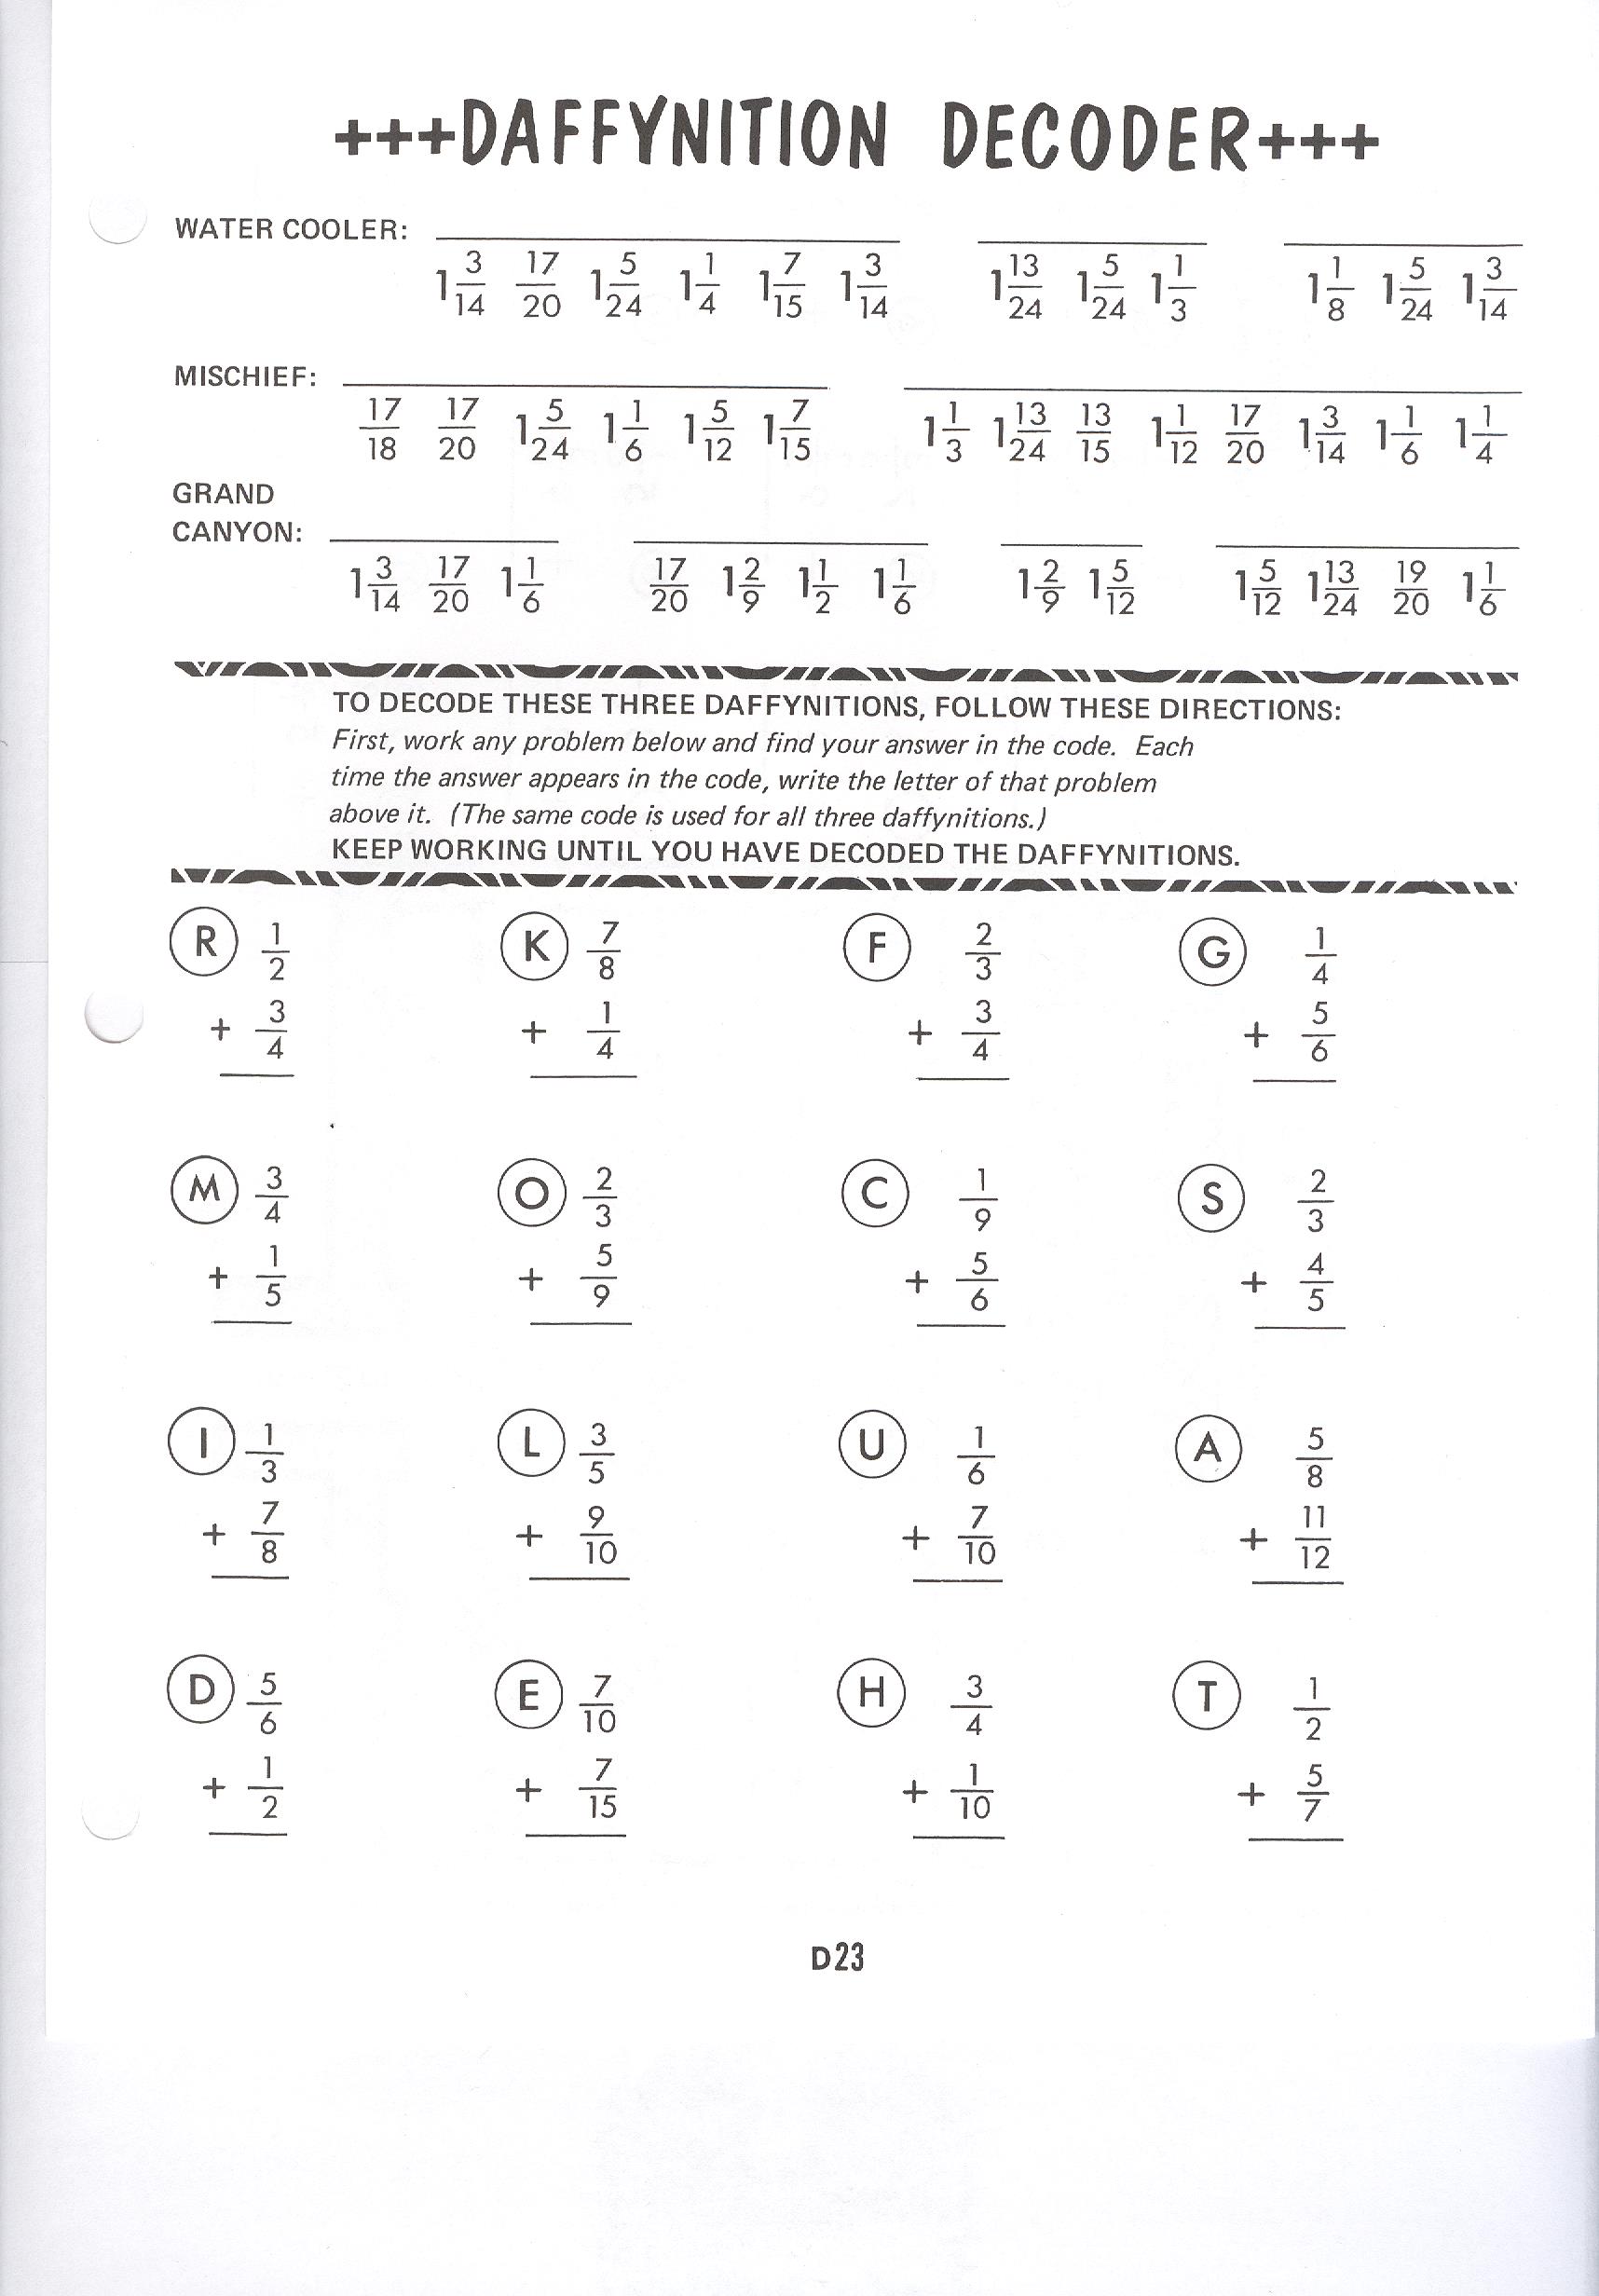 daddy-ition-decoder-answes-worksheet-daffynition-decoder-answer-key-schematic-and